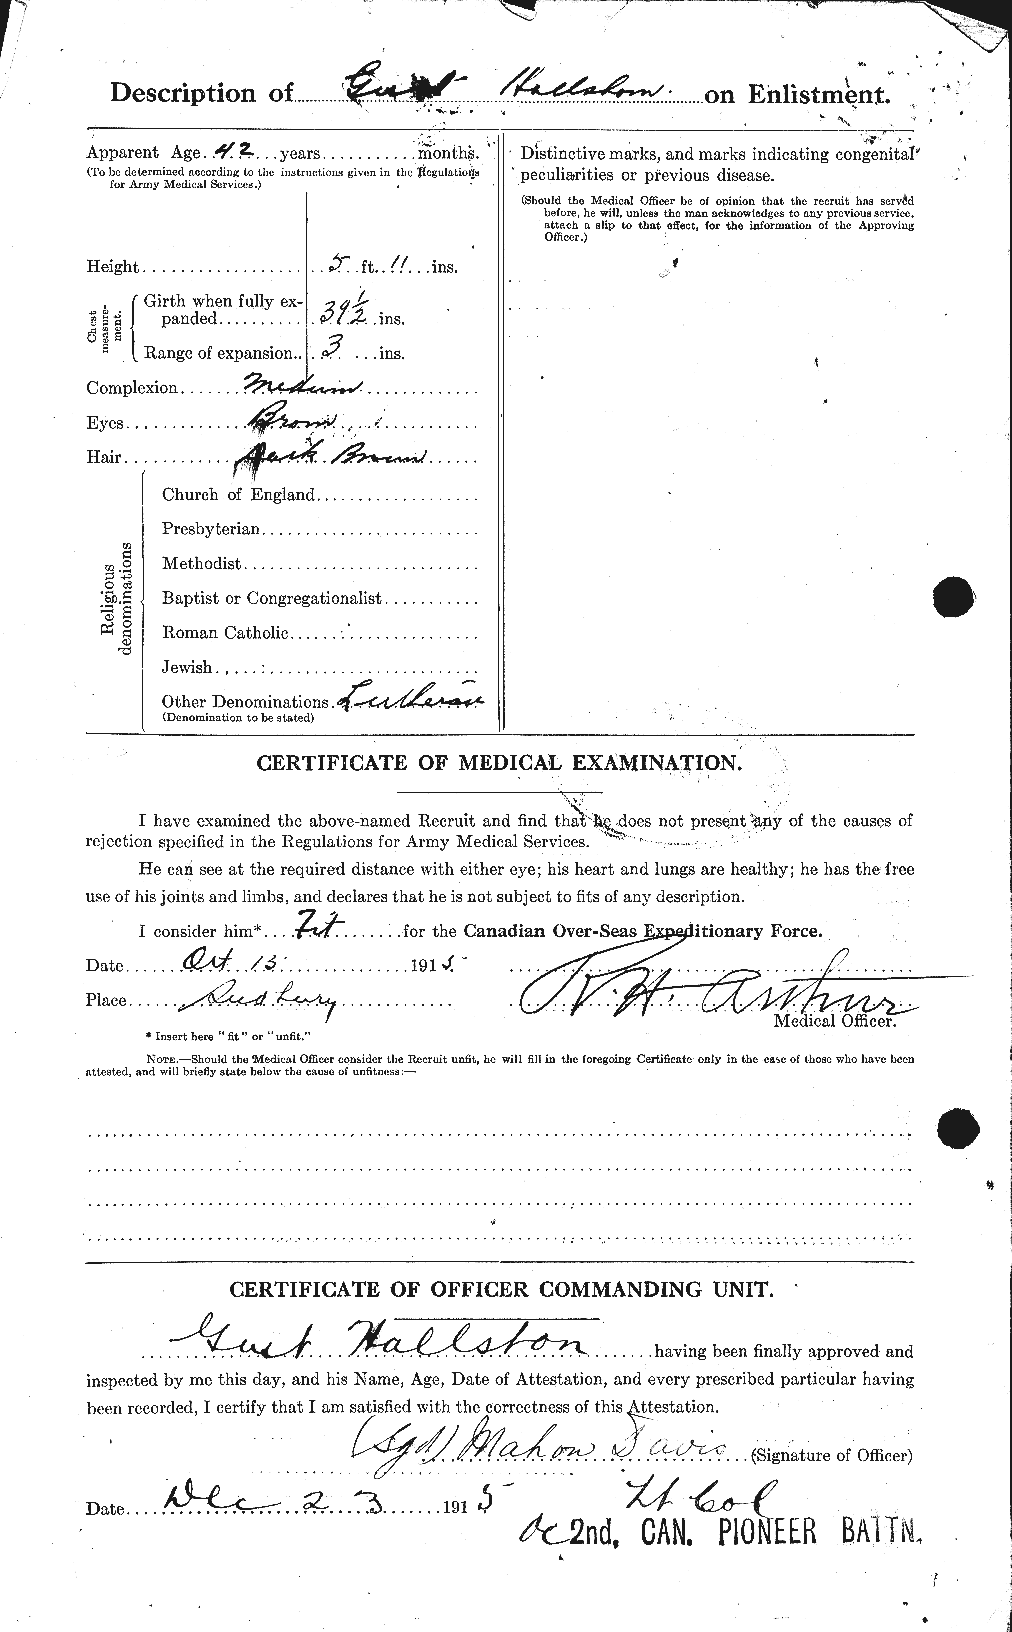 Personnel Records of the First World War - CEF 371307b